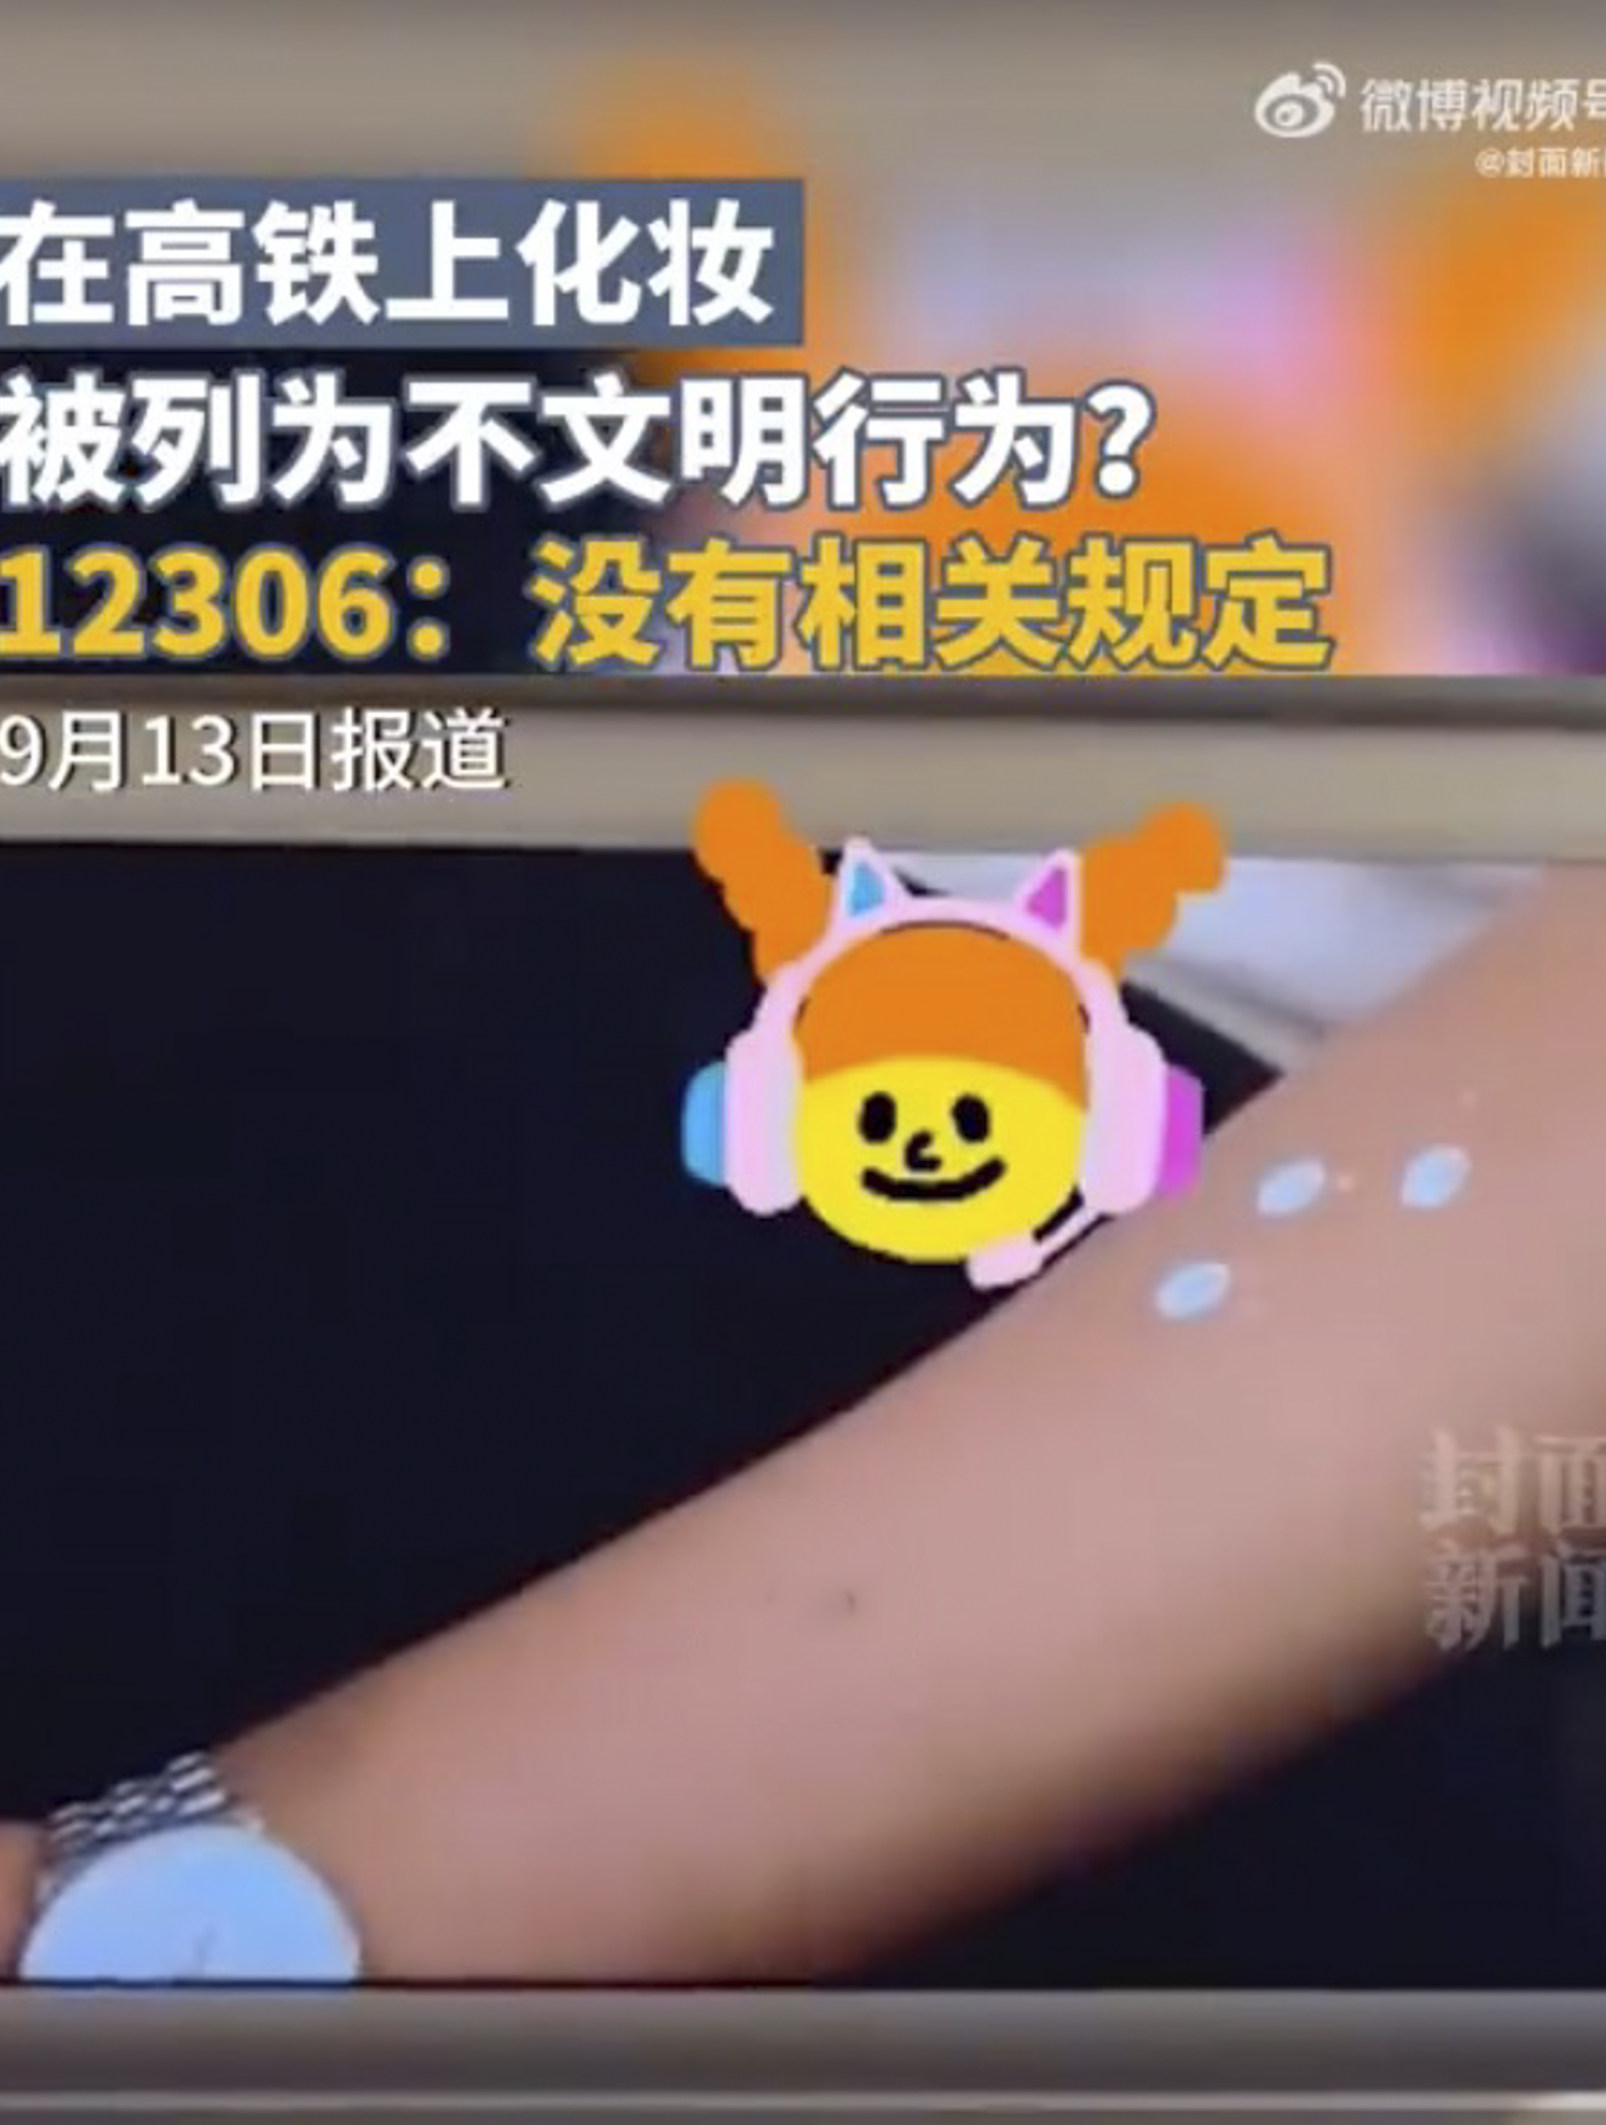 The video shows a woman passenger spilling lotion on the arm of a man sitting next to her. Photo: Weibo